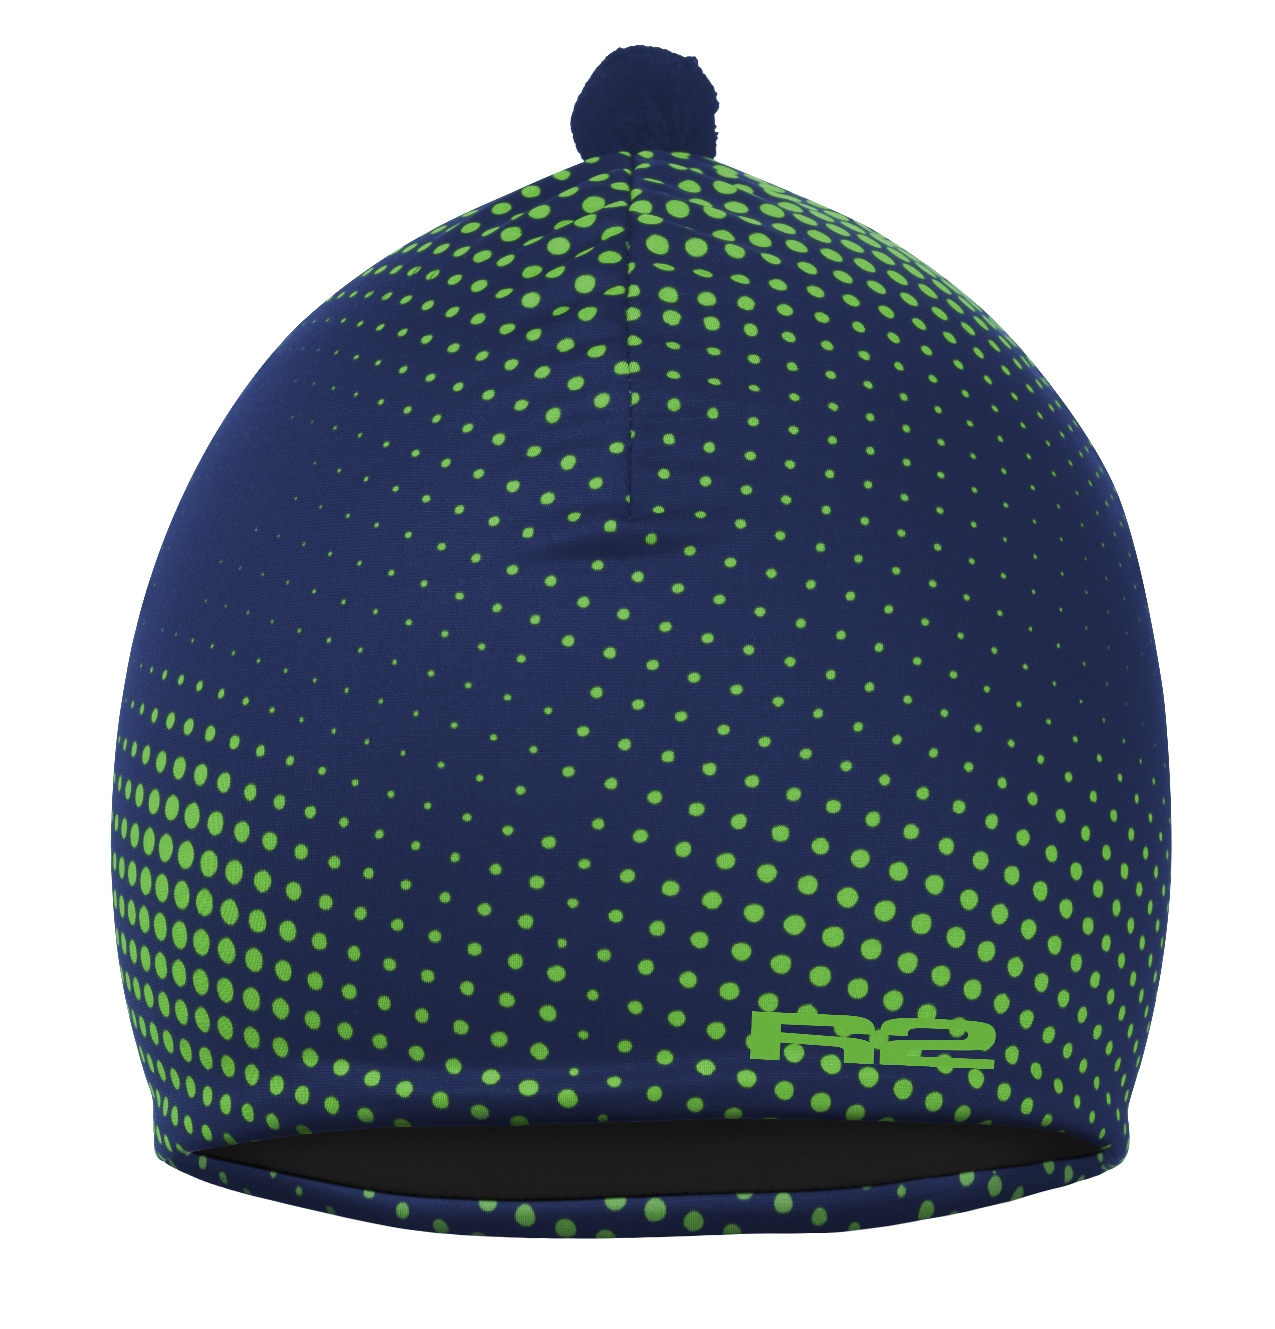 SPORTS FUNCTIONAL HAT R2 POINT  ATK11B